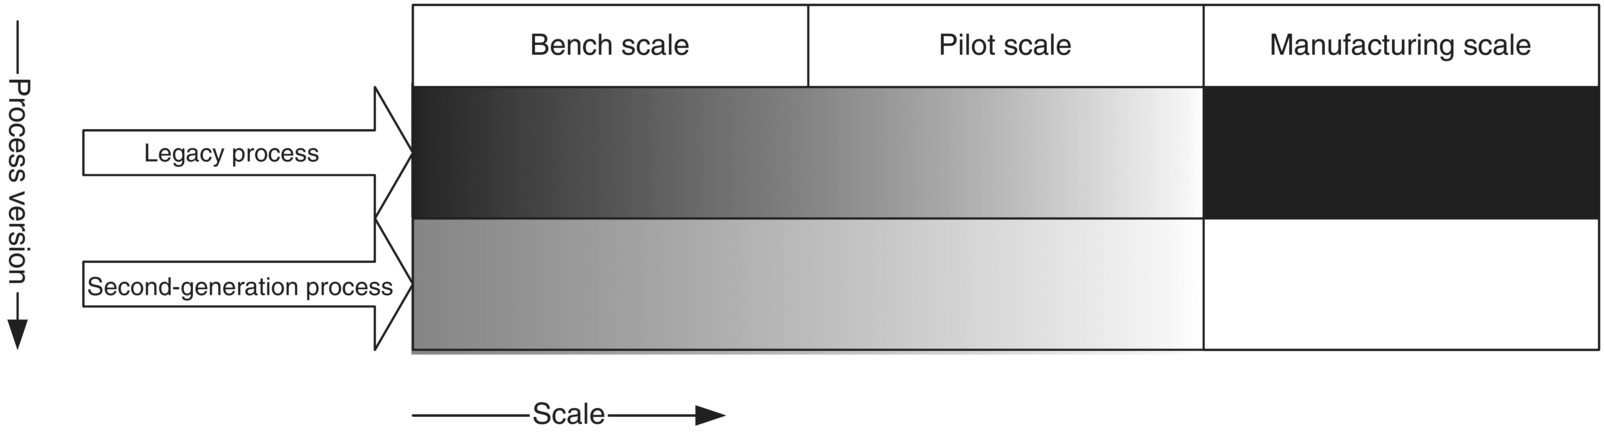 A table for the available runs and data across scales, with columns for bench, pilot, and manufacturing scales (left–right) and 2 rows pointed by right arrows labeled legacy process and second-generation process.